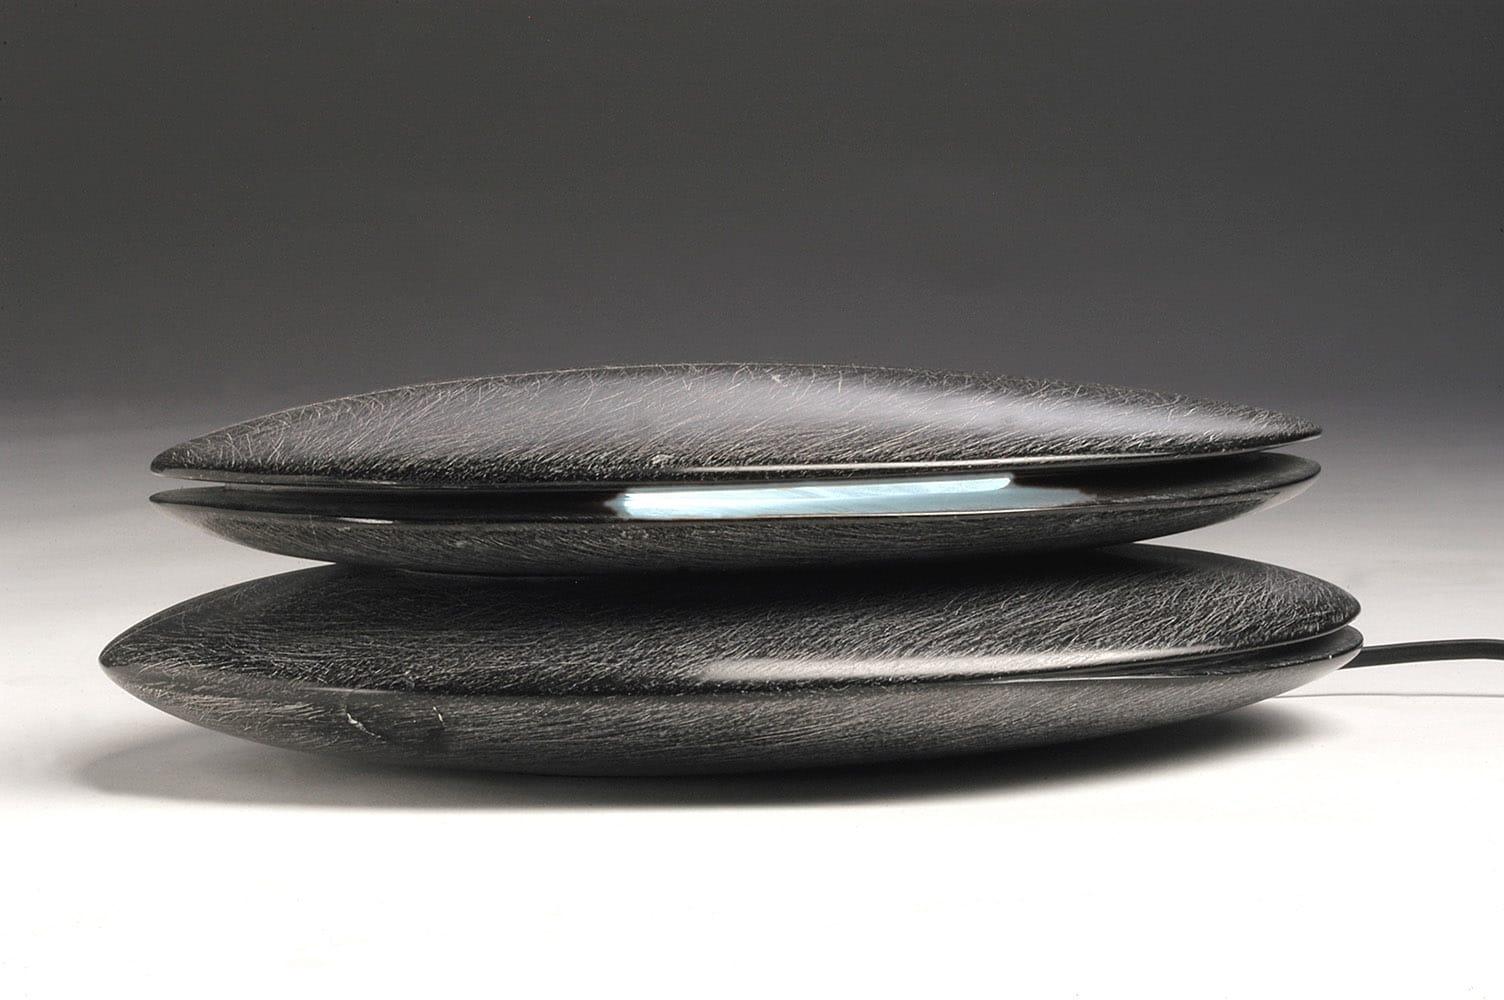 Light Element is a unique Belgium black marble and LED sculpture by contemporary artist Francesca Bernardini. The dimensions are 12 × 30 × 24 cm (4.7 × 11.8 × 9.4 in). 
The sculpture is signed and comes with a certificate of authenticity.

The